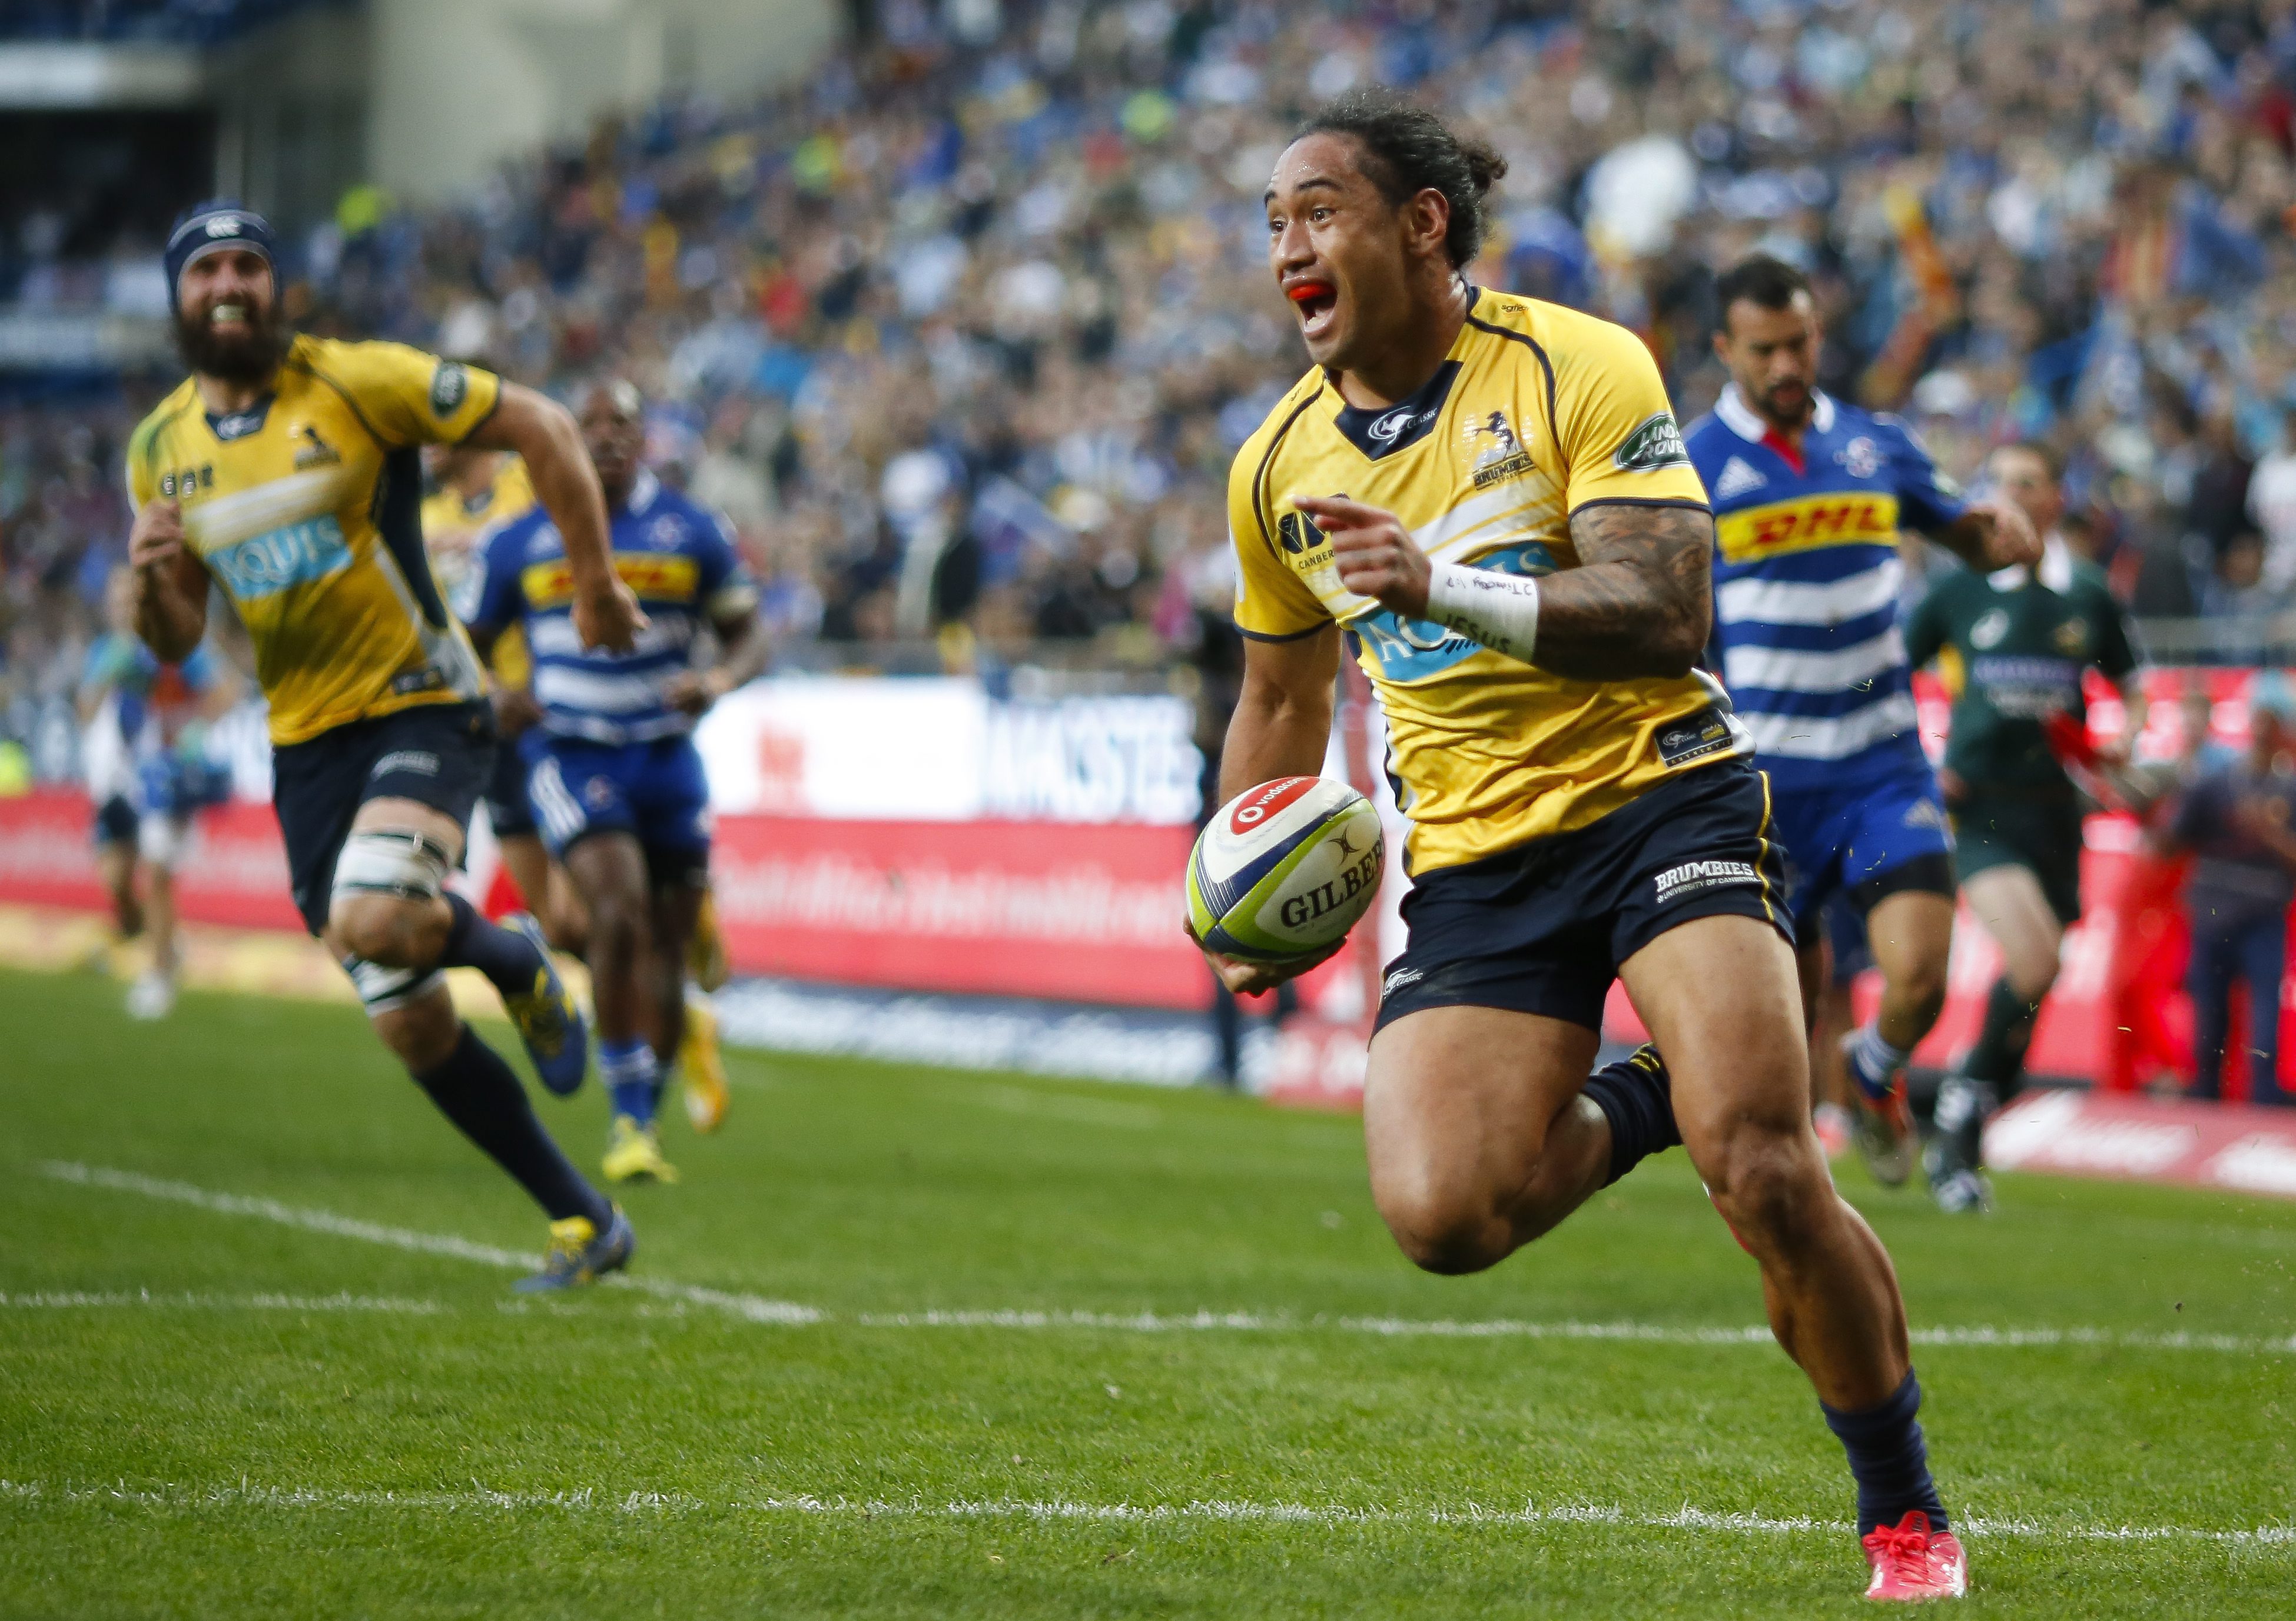 Joe Tomane breaks clear on his way to scoring his third try for the Brumbies in their 39-19 win over the Stormers in Cape Town. Photos: EPA